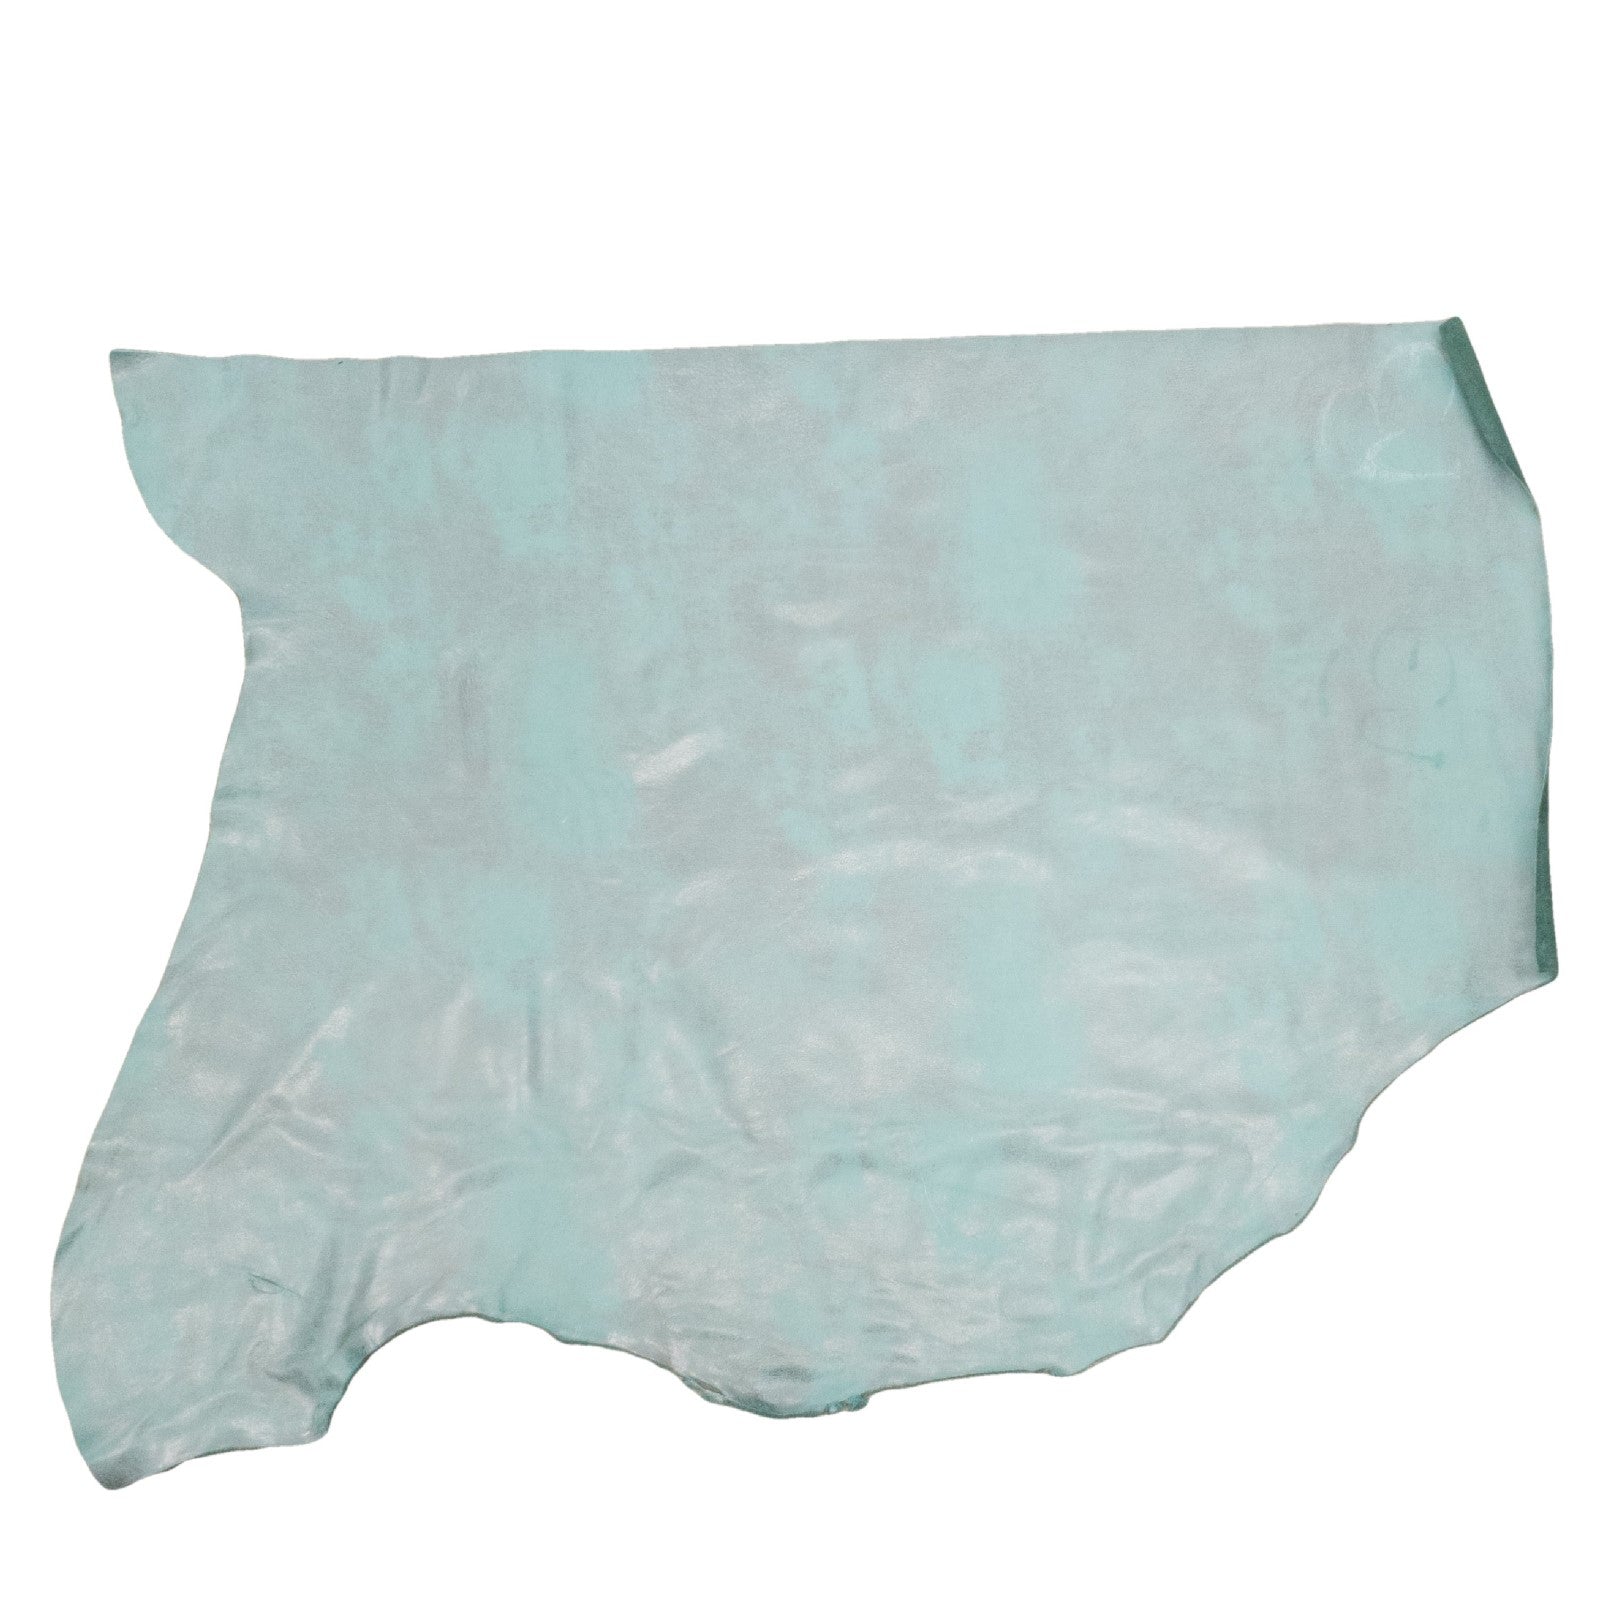 All Shook Up Aqua Rock N Roll 2-3 oz Leather Cow Hides, Bottom Piece / 6.5-7.5 Square Foot | The Leather Guy